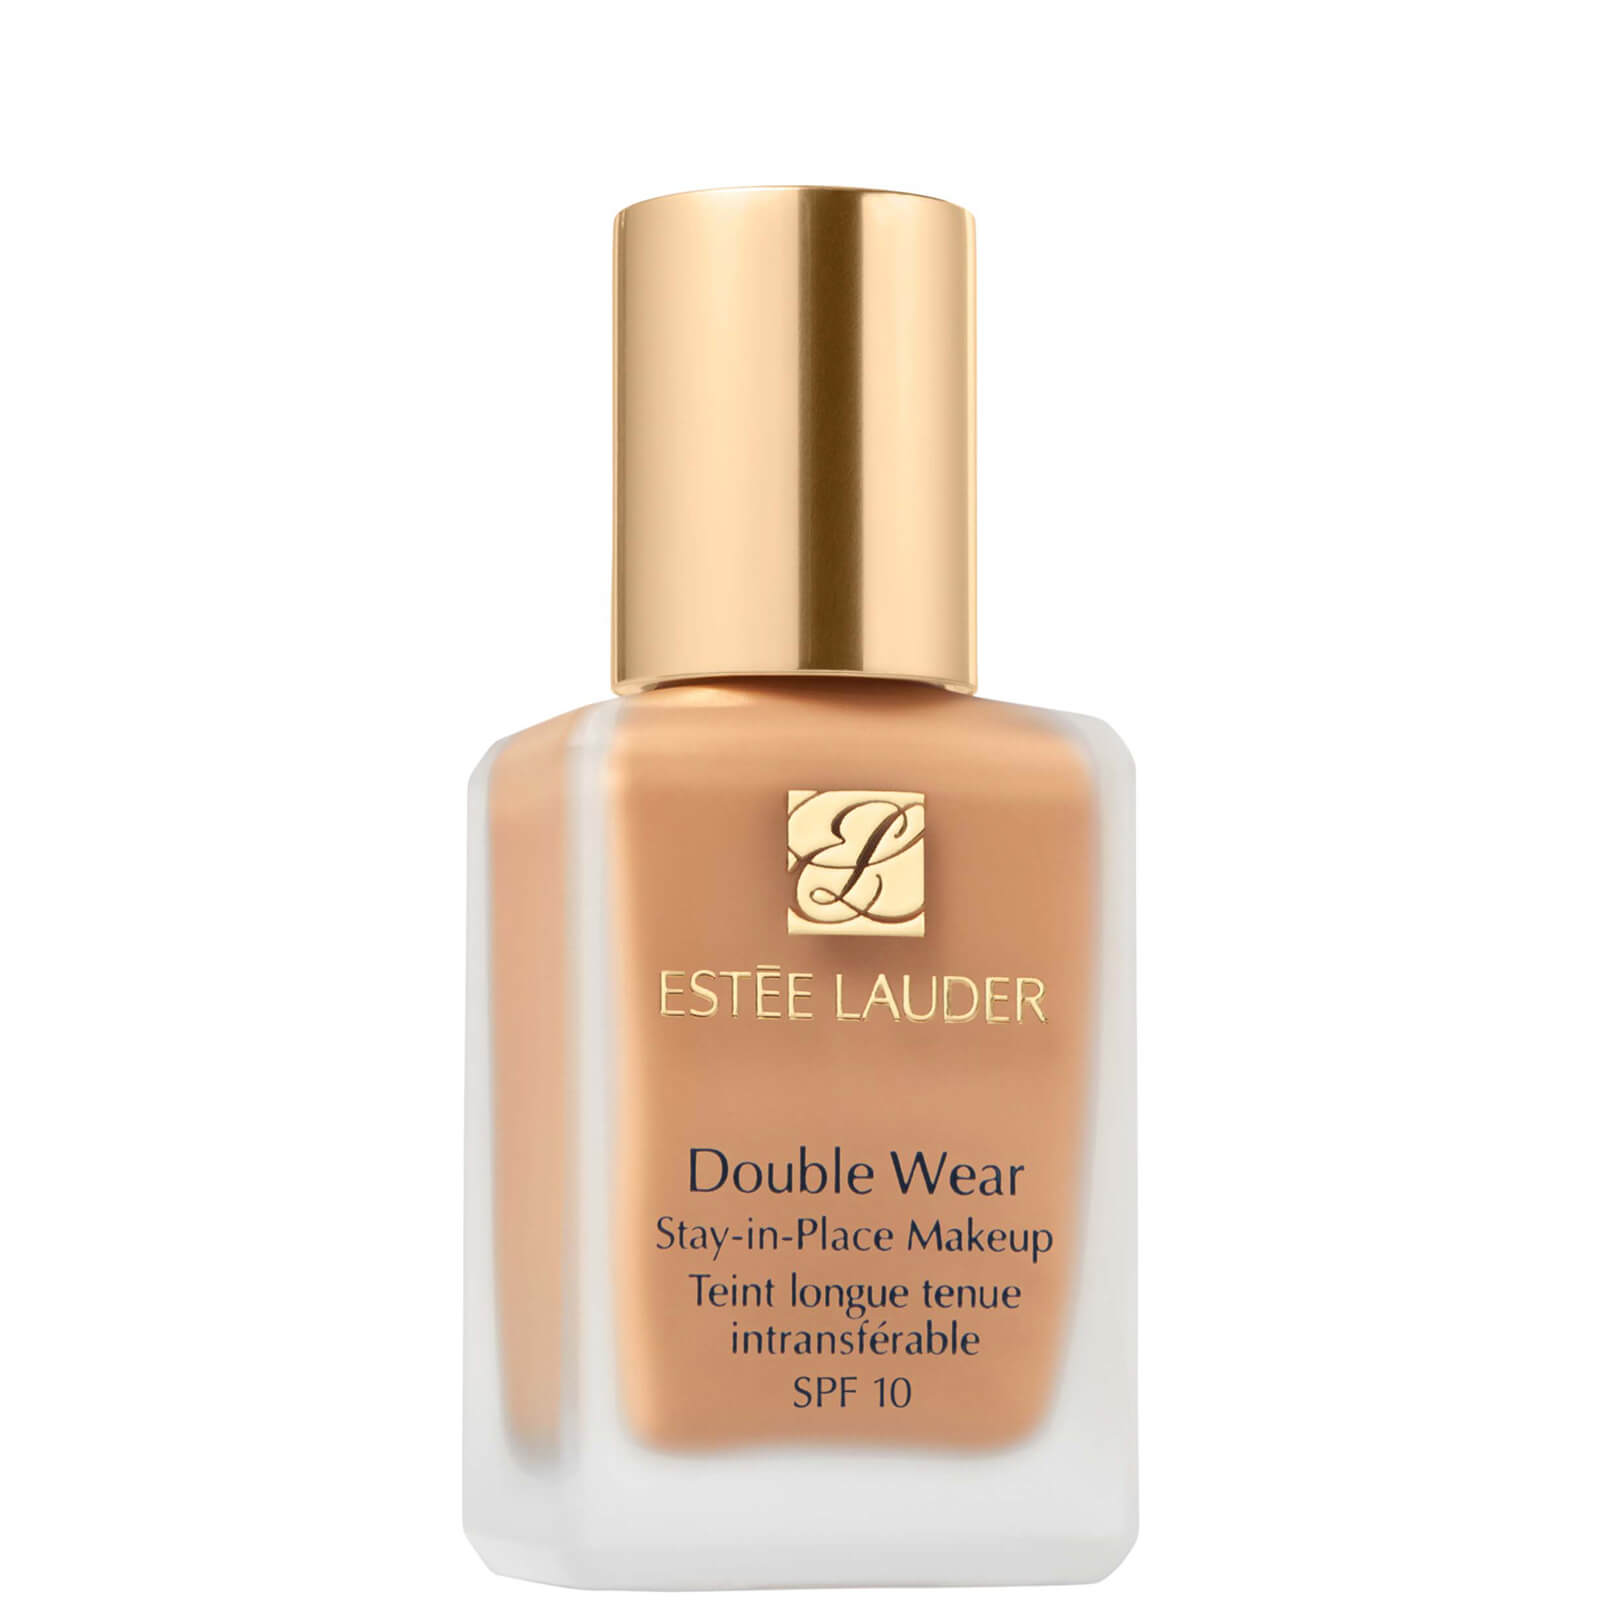 Estee Lauder Double Wear Stay-in-Place Makeup 30ml (Various Shades) - 3C0 Cool Creme